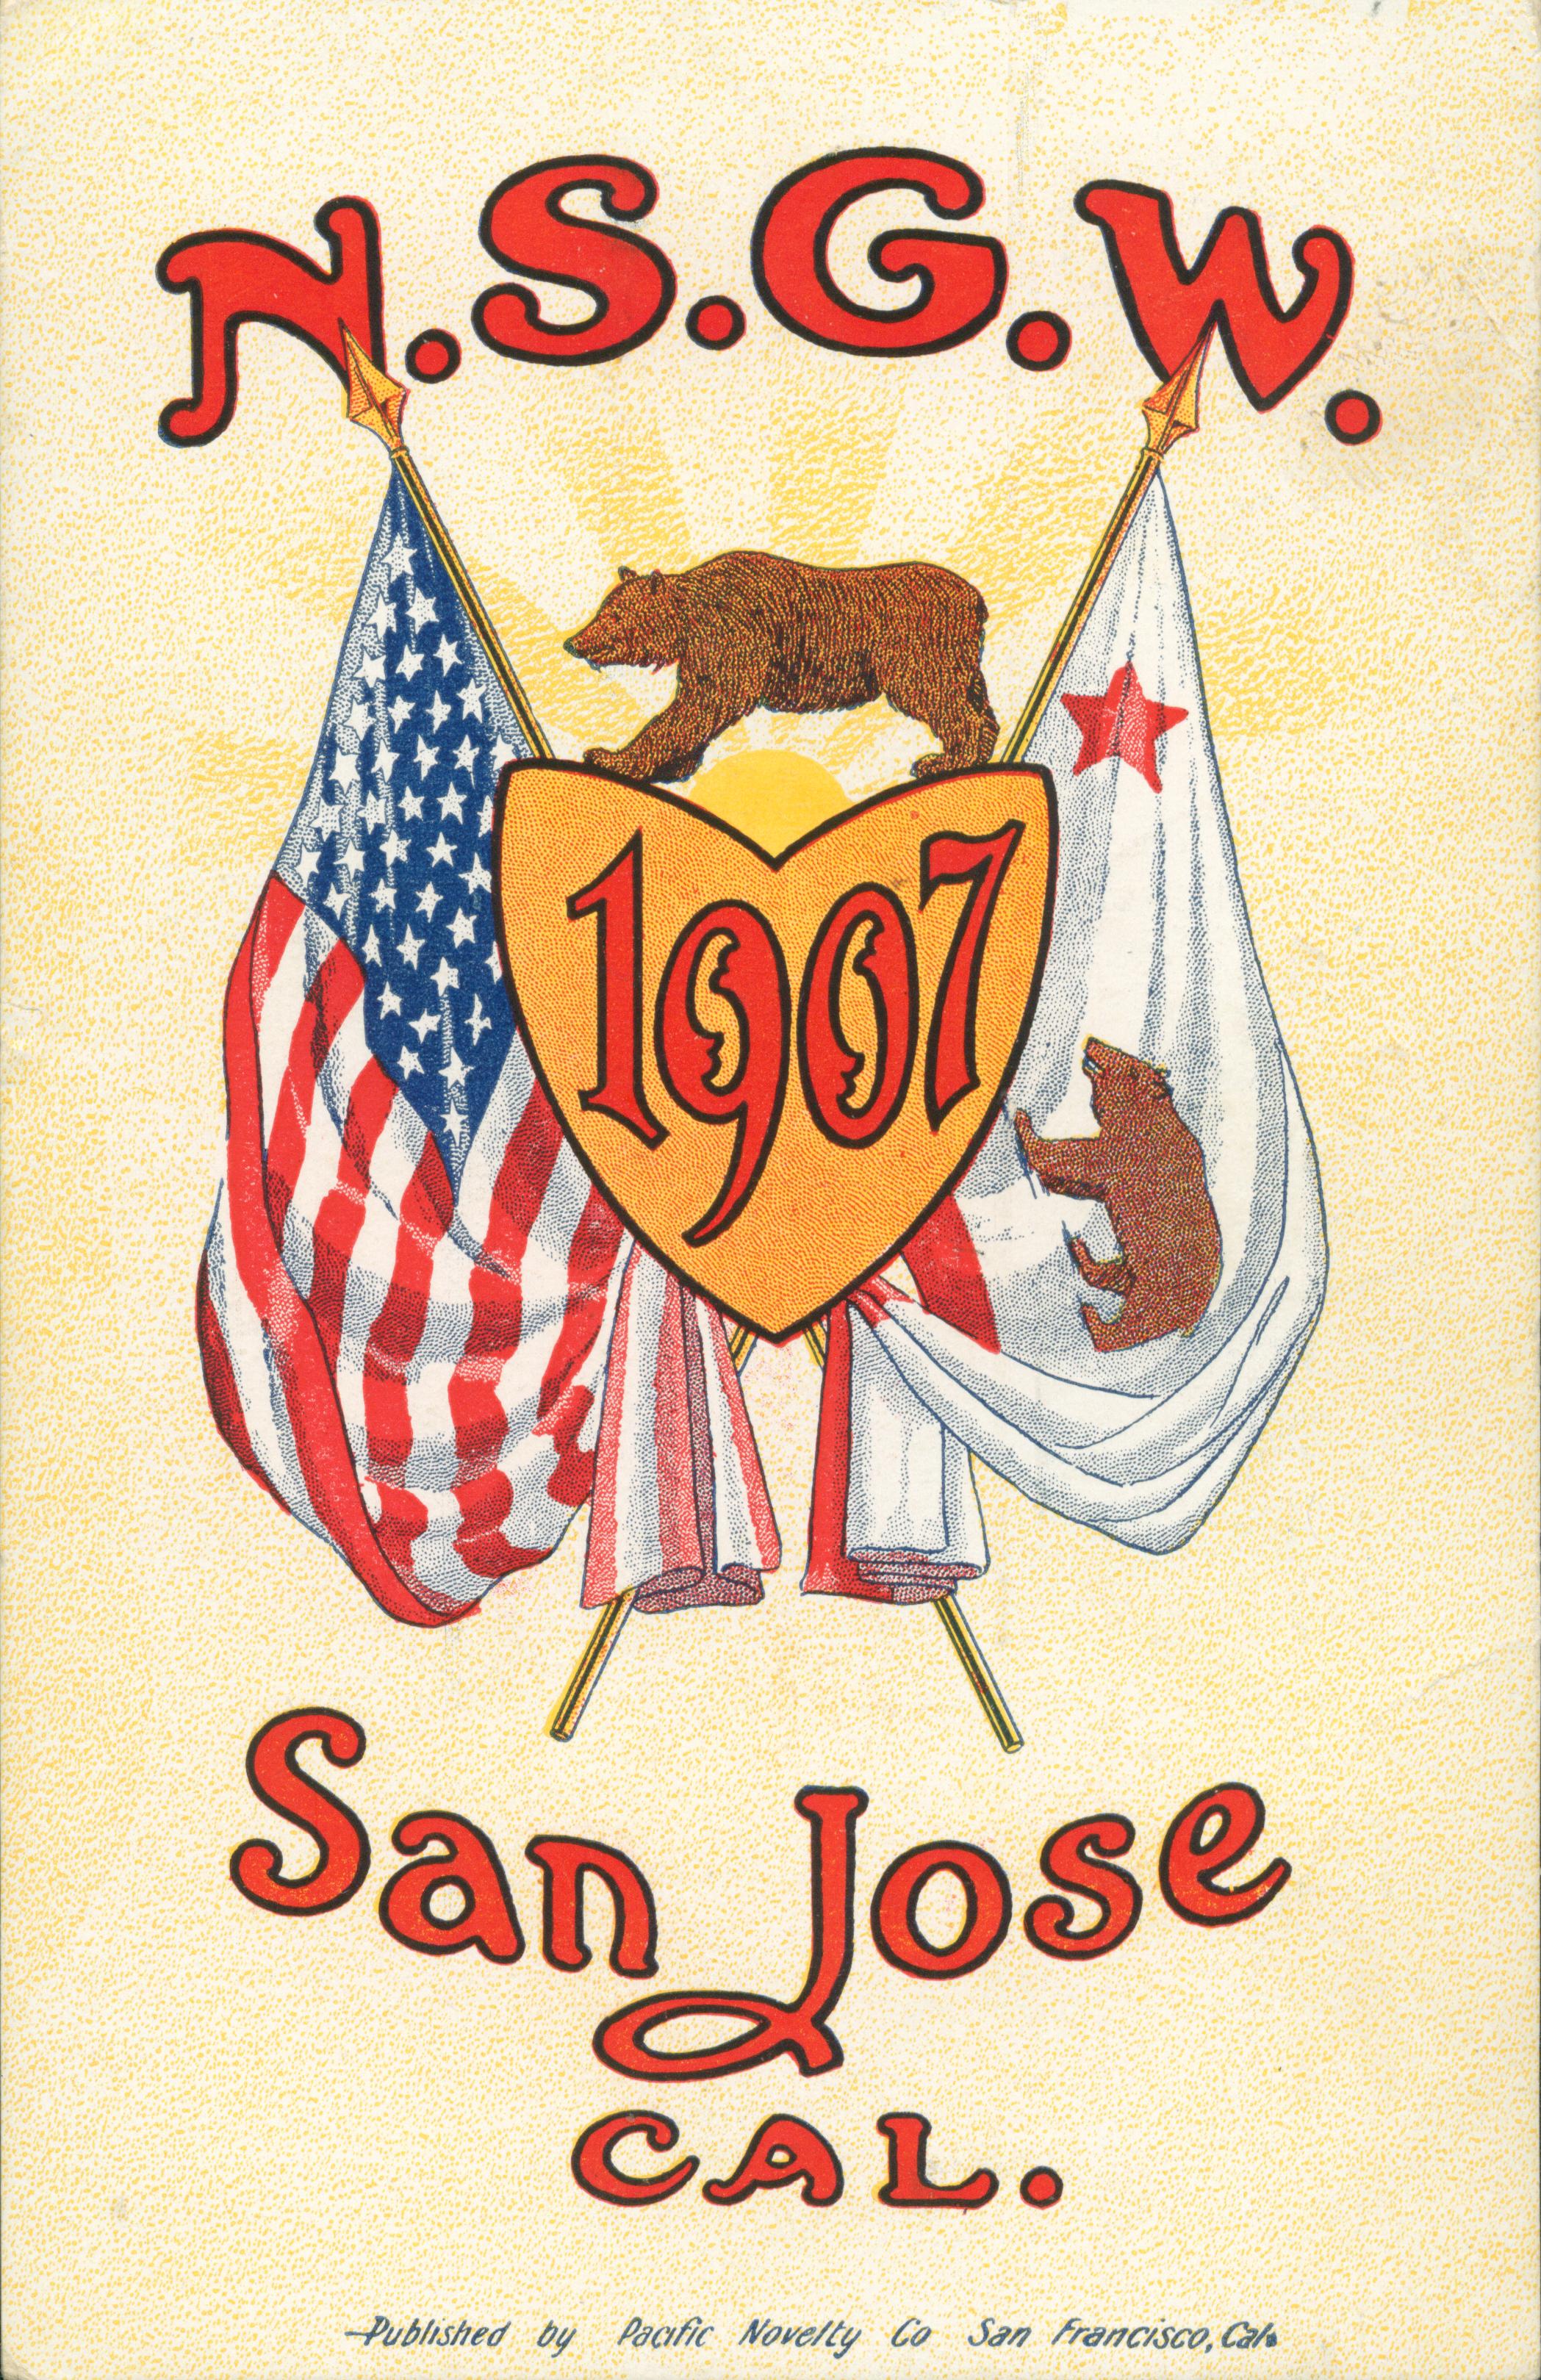 Artist's color rendition of the United States and California Flags with a bear perched above the two flags, celebration information written